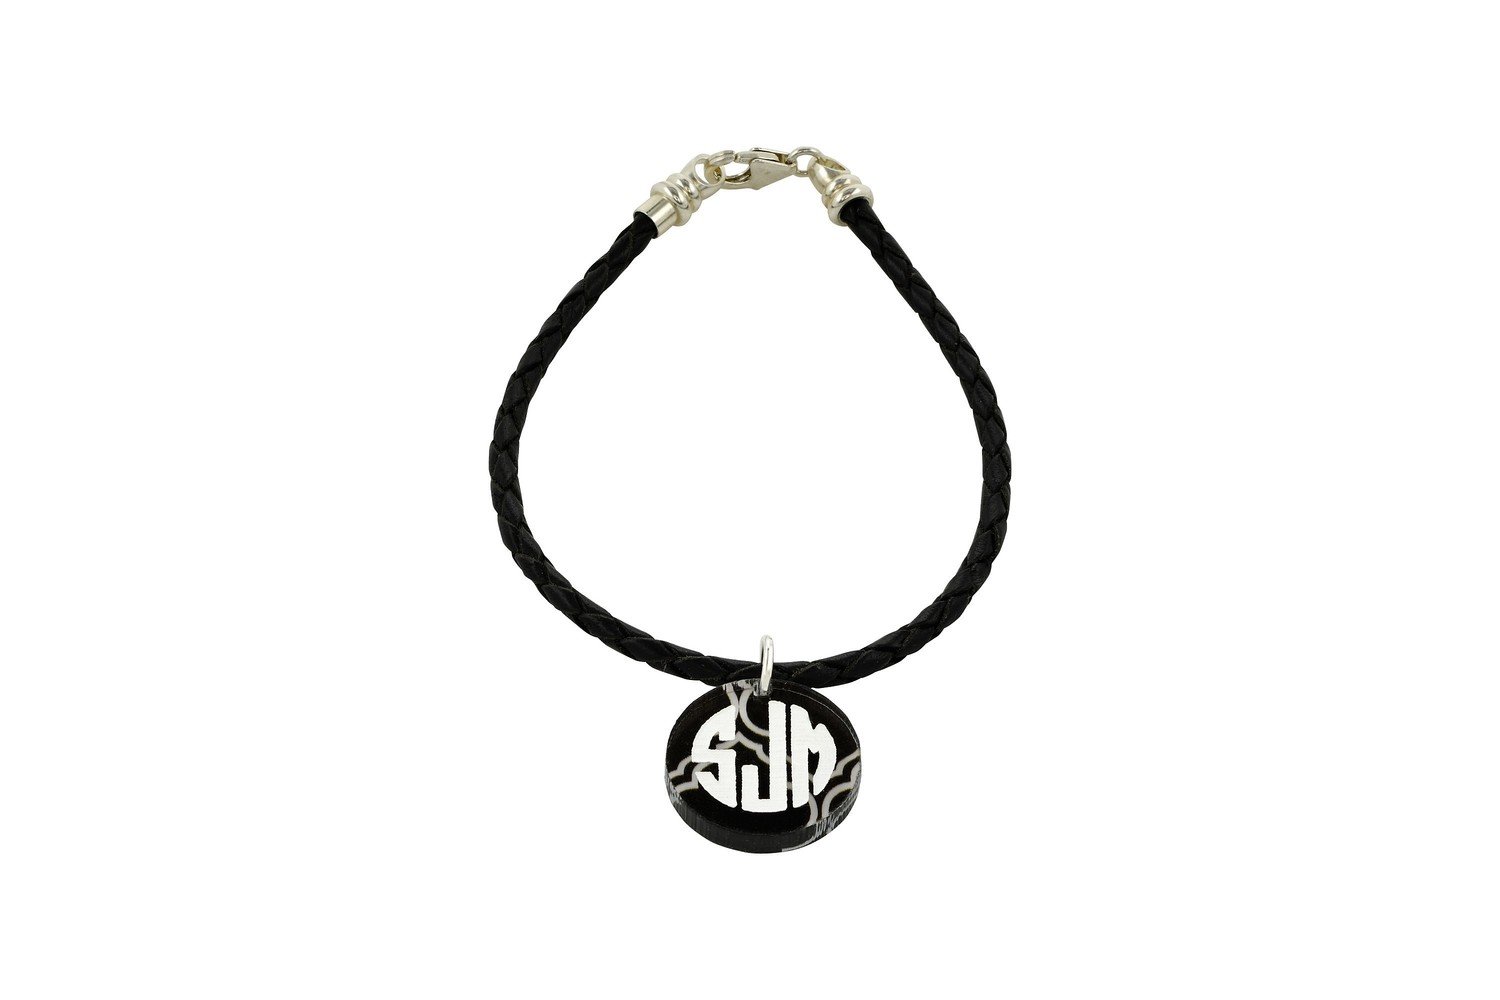 Traditional Monogram Charm with Decorative Braided Leather Cord Bracelet